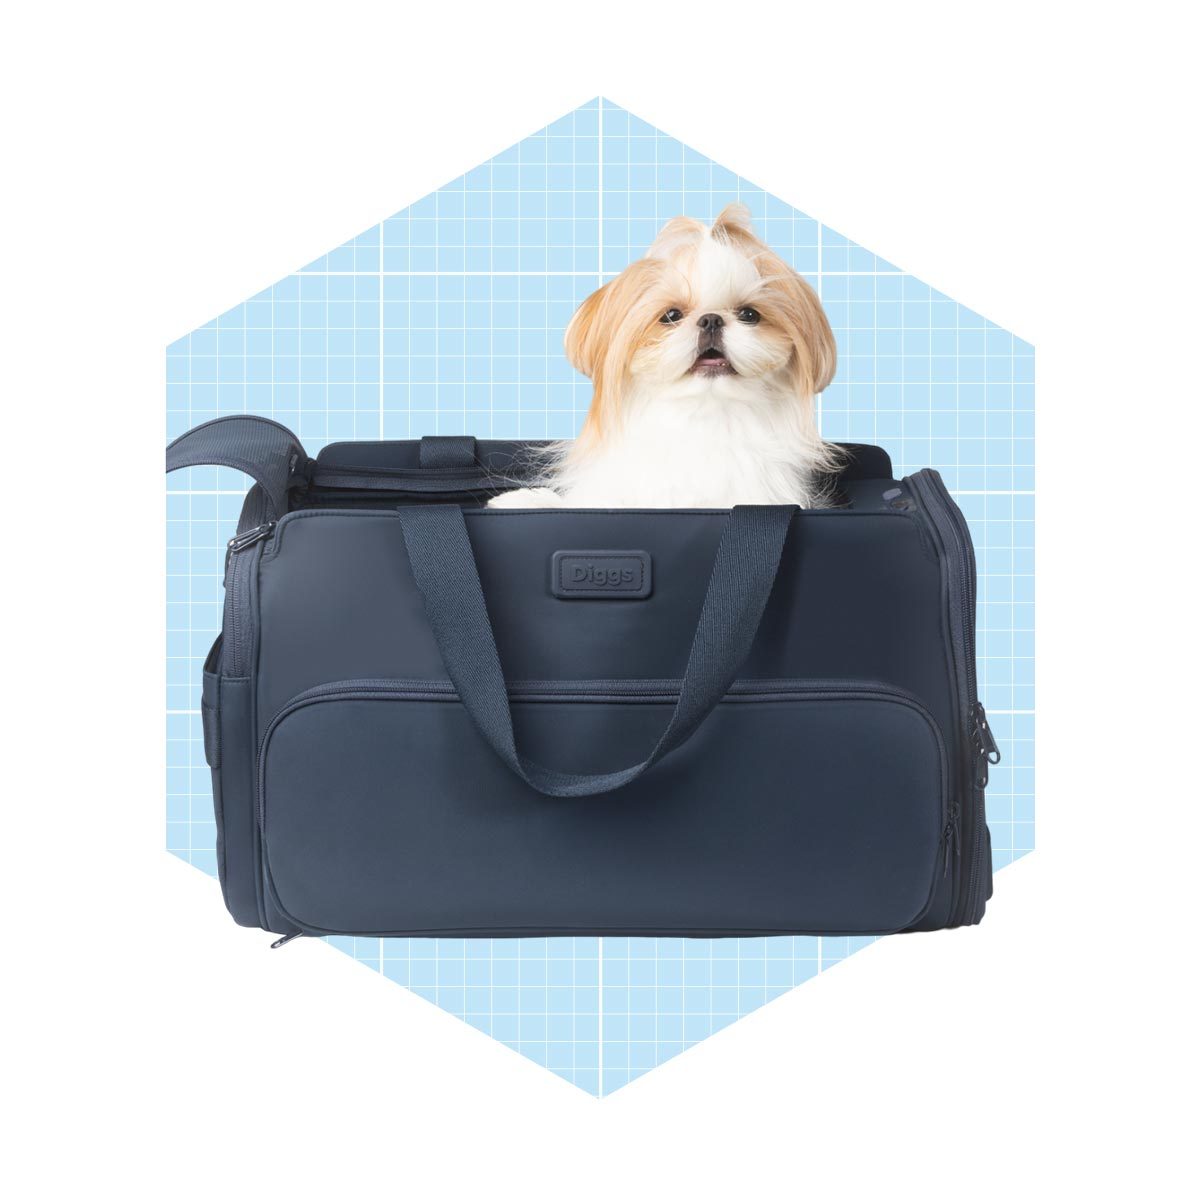 <h3>Diggs Passenger Travel Pet Carrier</h3> <p>The <a href="https://www.walmart.com/ip/Passenger-Travel-Pet-Carrier-Navy/510077998?wmlspartner=wlpa&selectedSellerId=101023929" rel="nofollow noopener noreferrer">Diggs Passenger Travel Pet Carrier</a> has a five-star crash test rating, the highest score given by the Center for Pet Safety. This stylish, luxurious pet carrier is optimal for small pets up to 18 pounds. It includes an innovative pet waste cleanup system: Simply attach a Diggs pee pad to the included bed, and swap it out for a clean one if it becomes soiled during your trip.</p> <p>Custom buckles and seat belt clips strap your pet safely in place for your road trip. An interior tether keeps them inside the carrier—even when temporarily open—by simply clipping it to the <a href="https://www.familyhandyman.com/article/blue-9-balance-harness/" rel="noopener noreferrer">dog's harness</a>. It also fits most airline size standards should you take your little guy along for a plane ride.</p> <p><strong>Pros</strong></p> <ul> <li>Ideal for dogs (and cats!) up to 18 pounds</li> <li>Crash-tested five-star rating</li> <li>Luxury style bag</li> <li>Unique pet waste system</li> <li>30-day return policy</li> </ul> <p><strong>Cons</strong></p> <ul> <li>You'll pay a little more (but in return receive safety, style and added features)</li> </ul> <p class="listicle-page__cta-button-shop"><a class="shop-btn" href="https://www.walmart.com/ip/Passenger-Travel-Pet-Carrier-Navy/510077998?wmlspartner=wlpa&selectedSellerId=101023929">Shop Now</a></p>